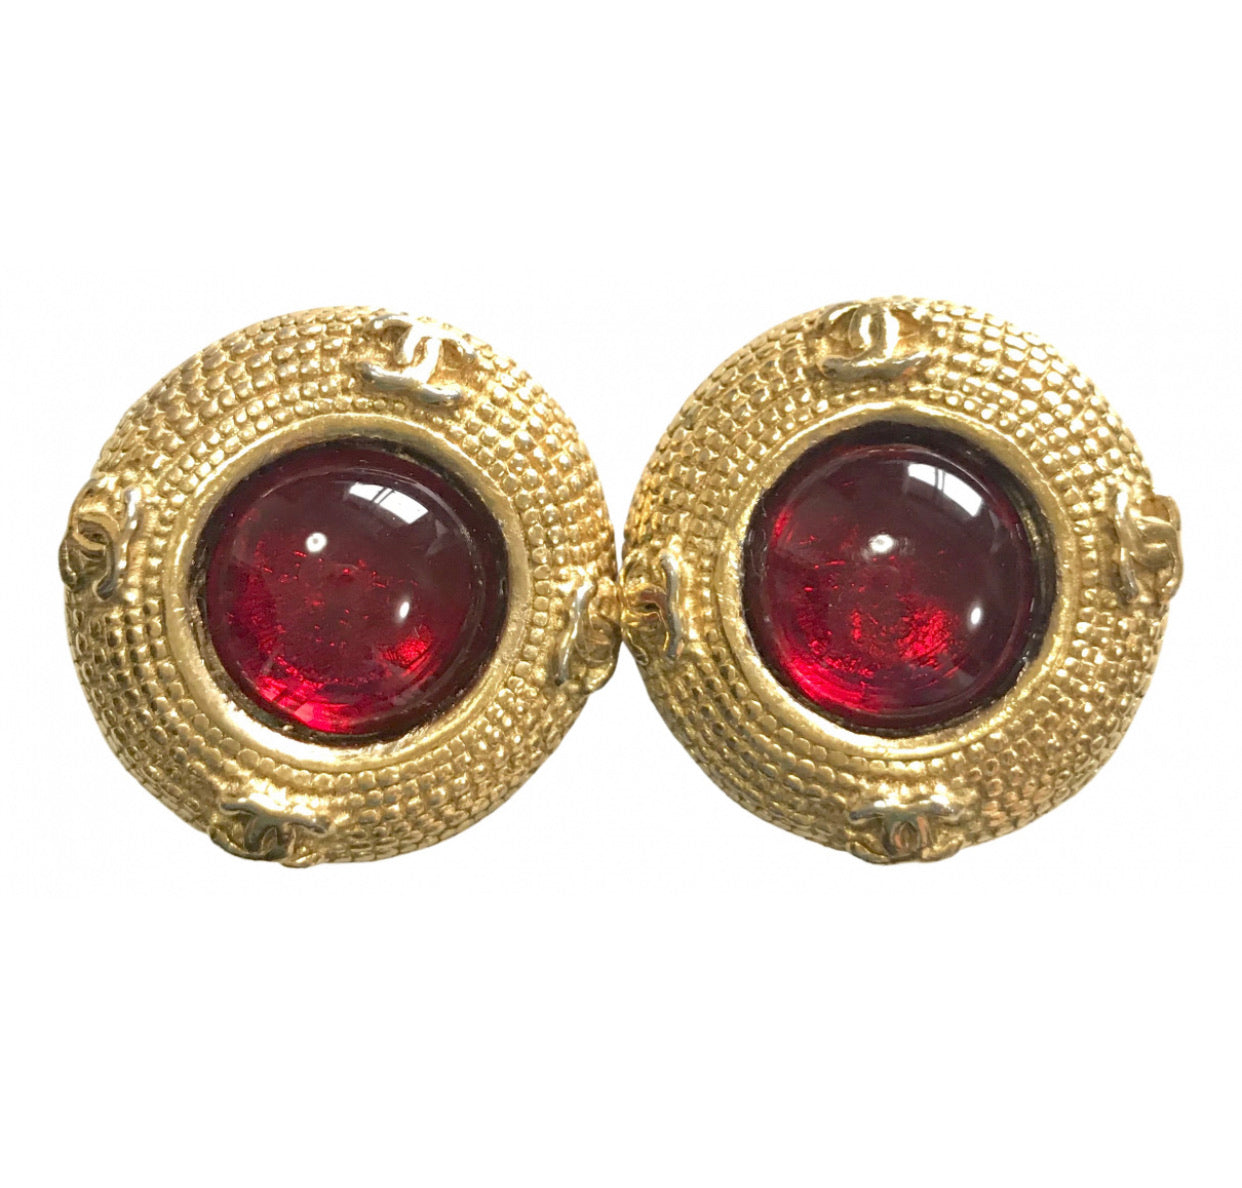 Chanel Vintage CC Round Clip On Earrings Gold Tone – Coco Approved Studio